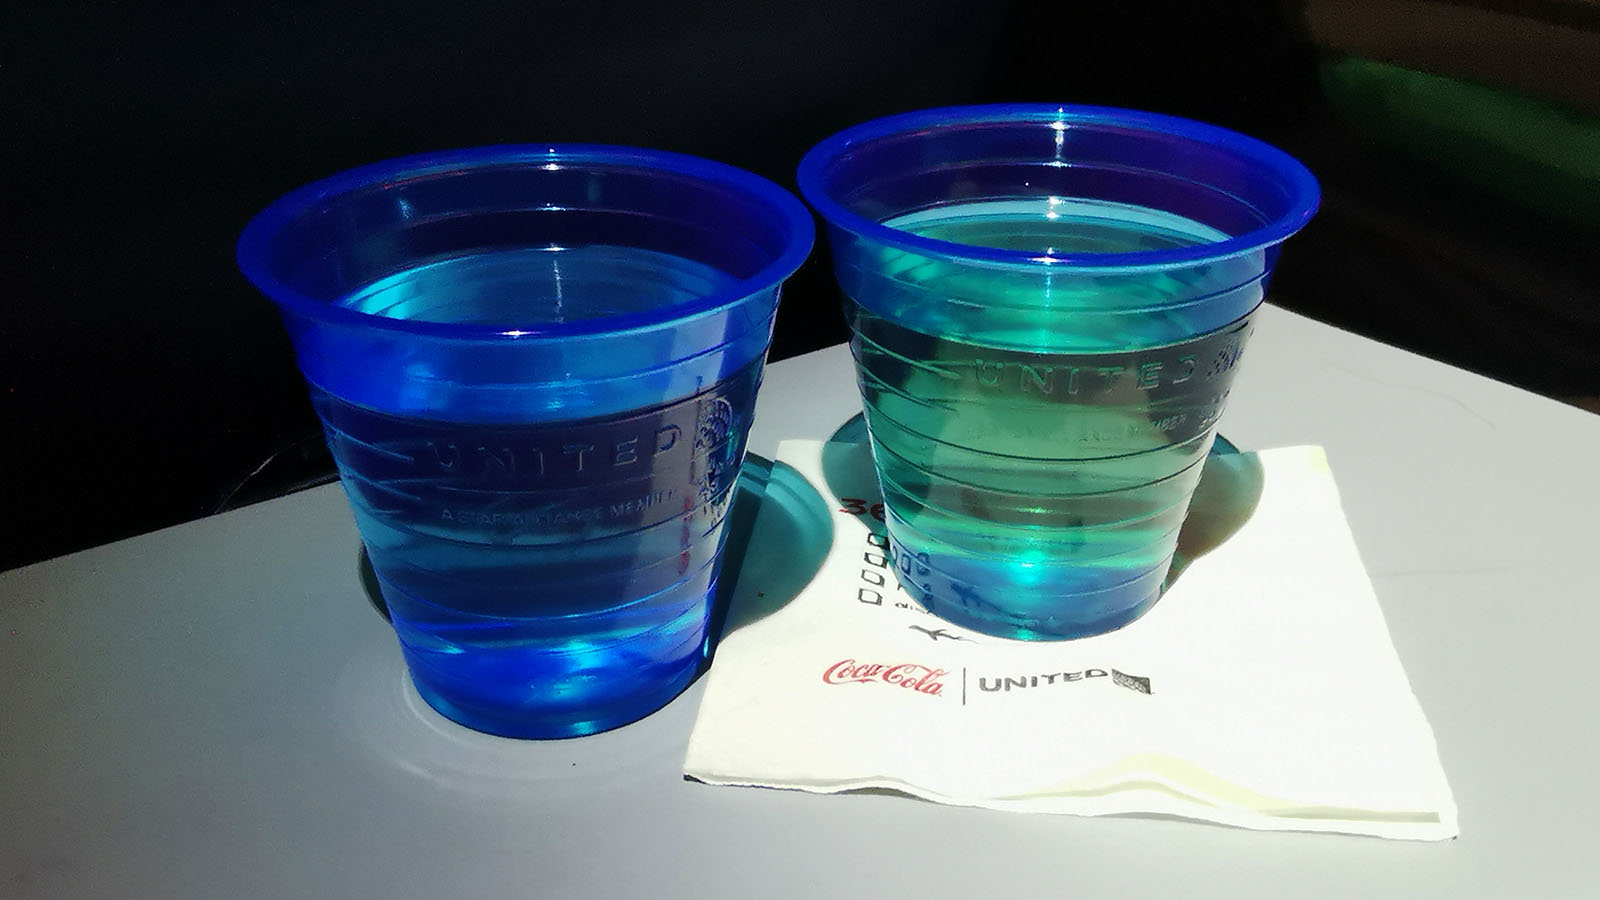 Refreshments in United Airlines Boeing 787 Economy